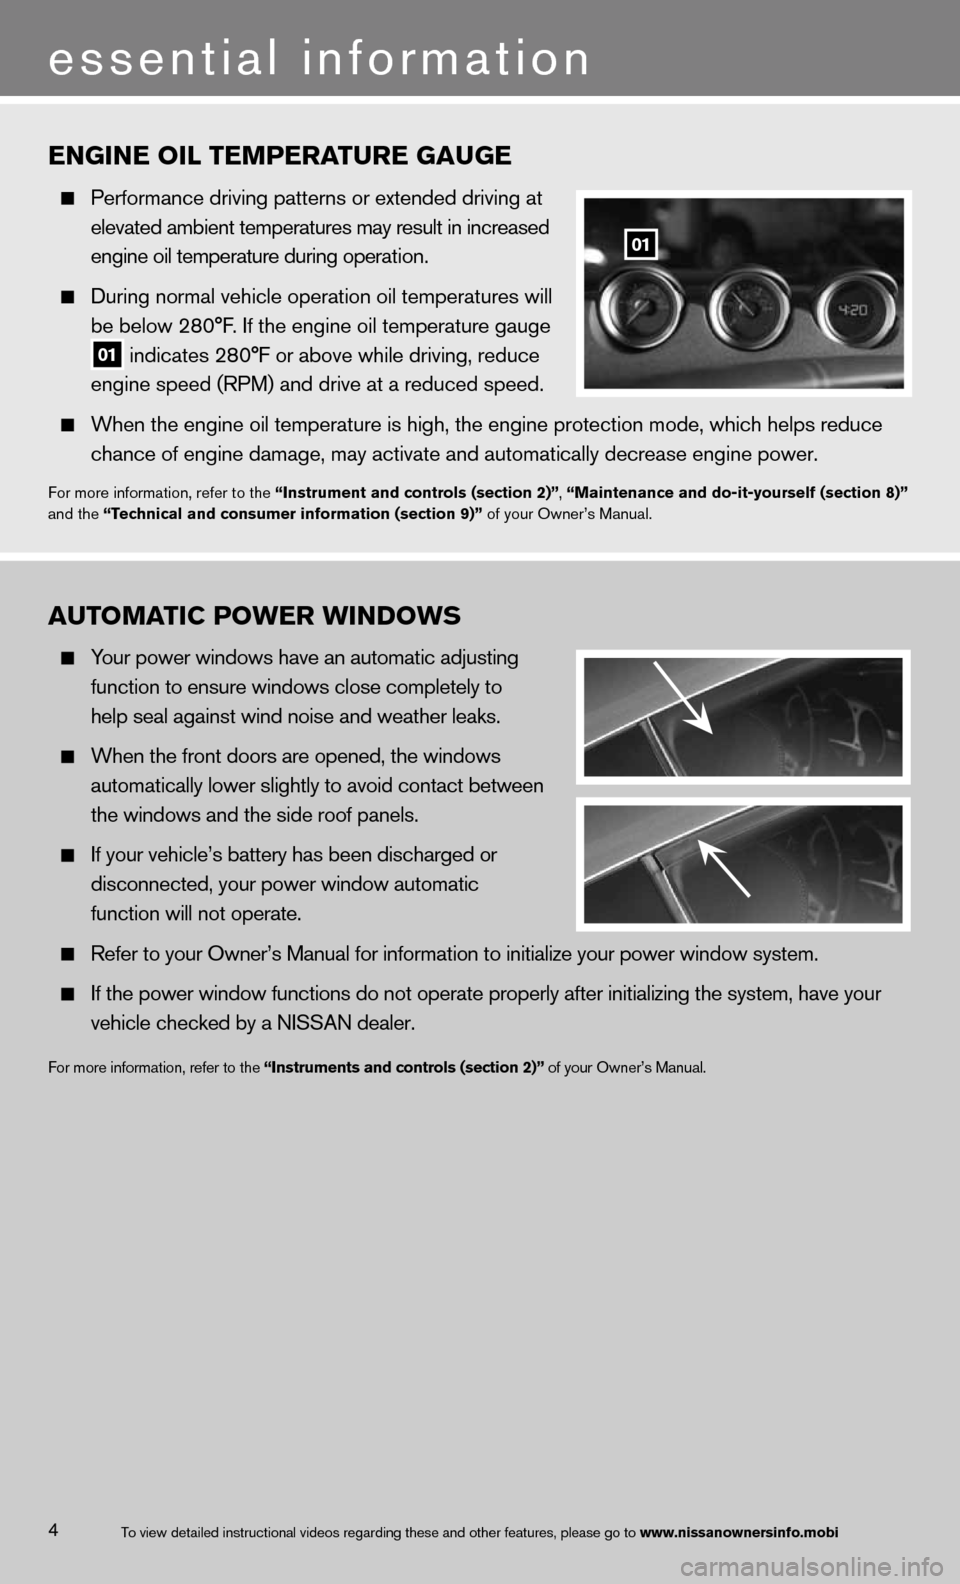 NISSAN 370Z ROADSTER 2013 Z34 Quick Reference Guide 4
ENGINE OI\b TEMPER\fTURE G\fUGE
  Performance driving\m pa\f\ferns or ex\fende\md driving a\f 
    eleva\fed ambien\f \femp\mera\fures may resul\f \min increased 
    engine oil \fempera\fu\mre duri